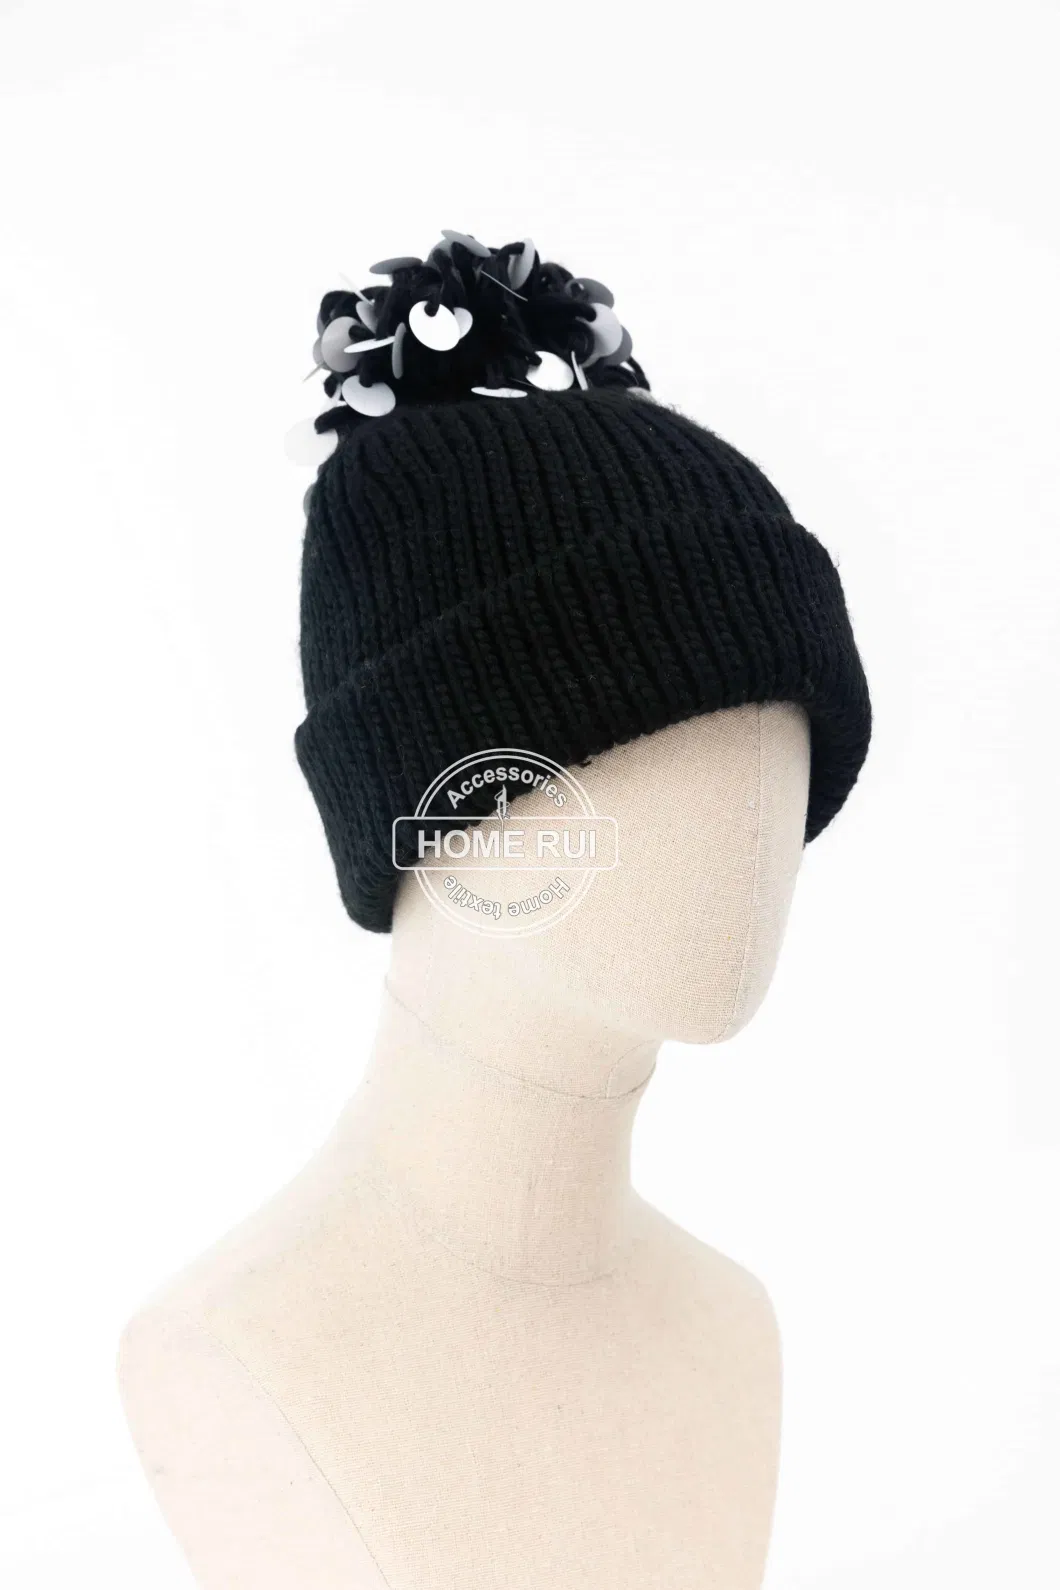 Women Warm Soft Thick Slouchy Acrylic Fold Edge Silver Plastic Sequin Deco Pompom Black Knitted Solid Plain Bonnet Casual Hat Beanie